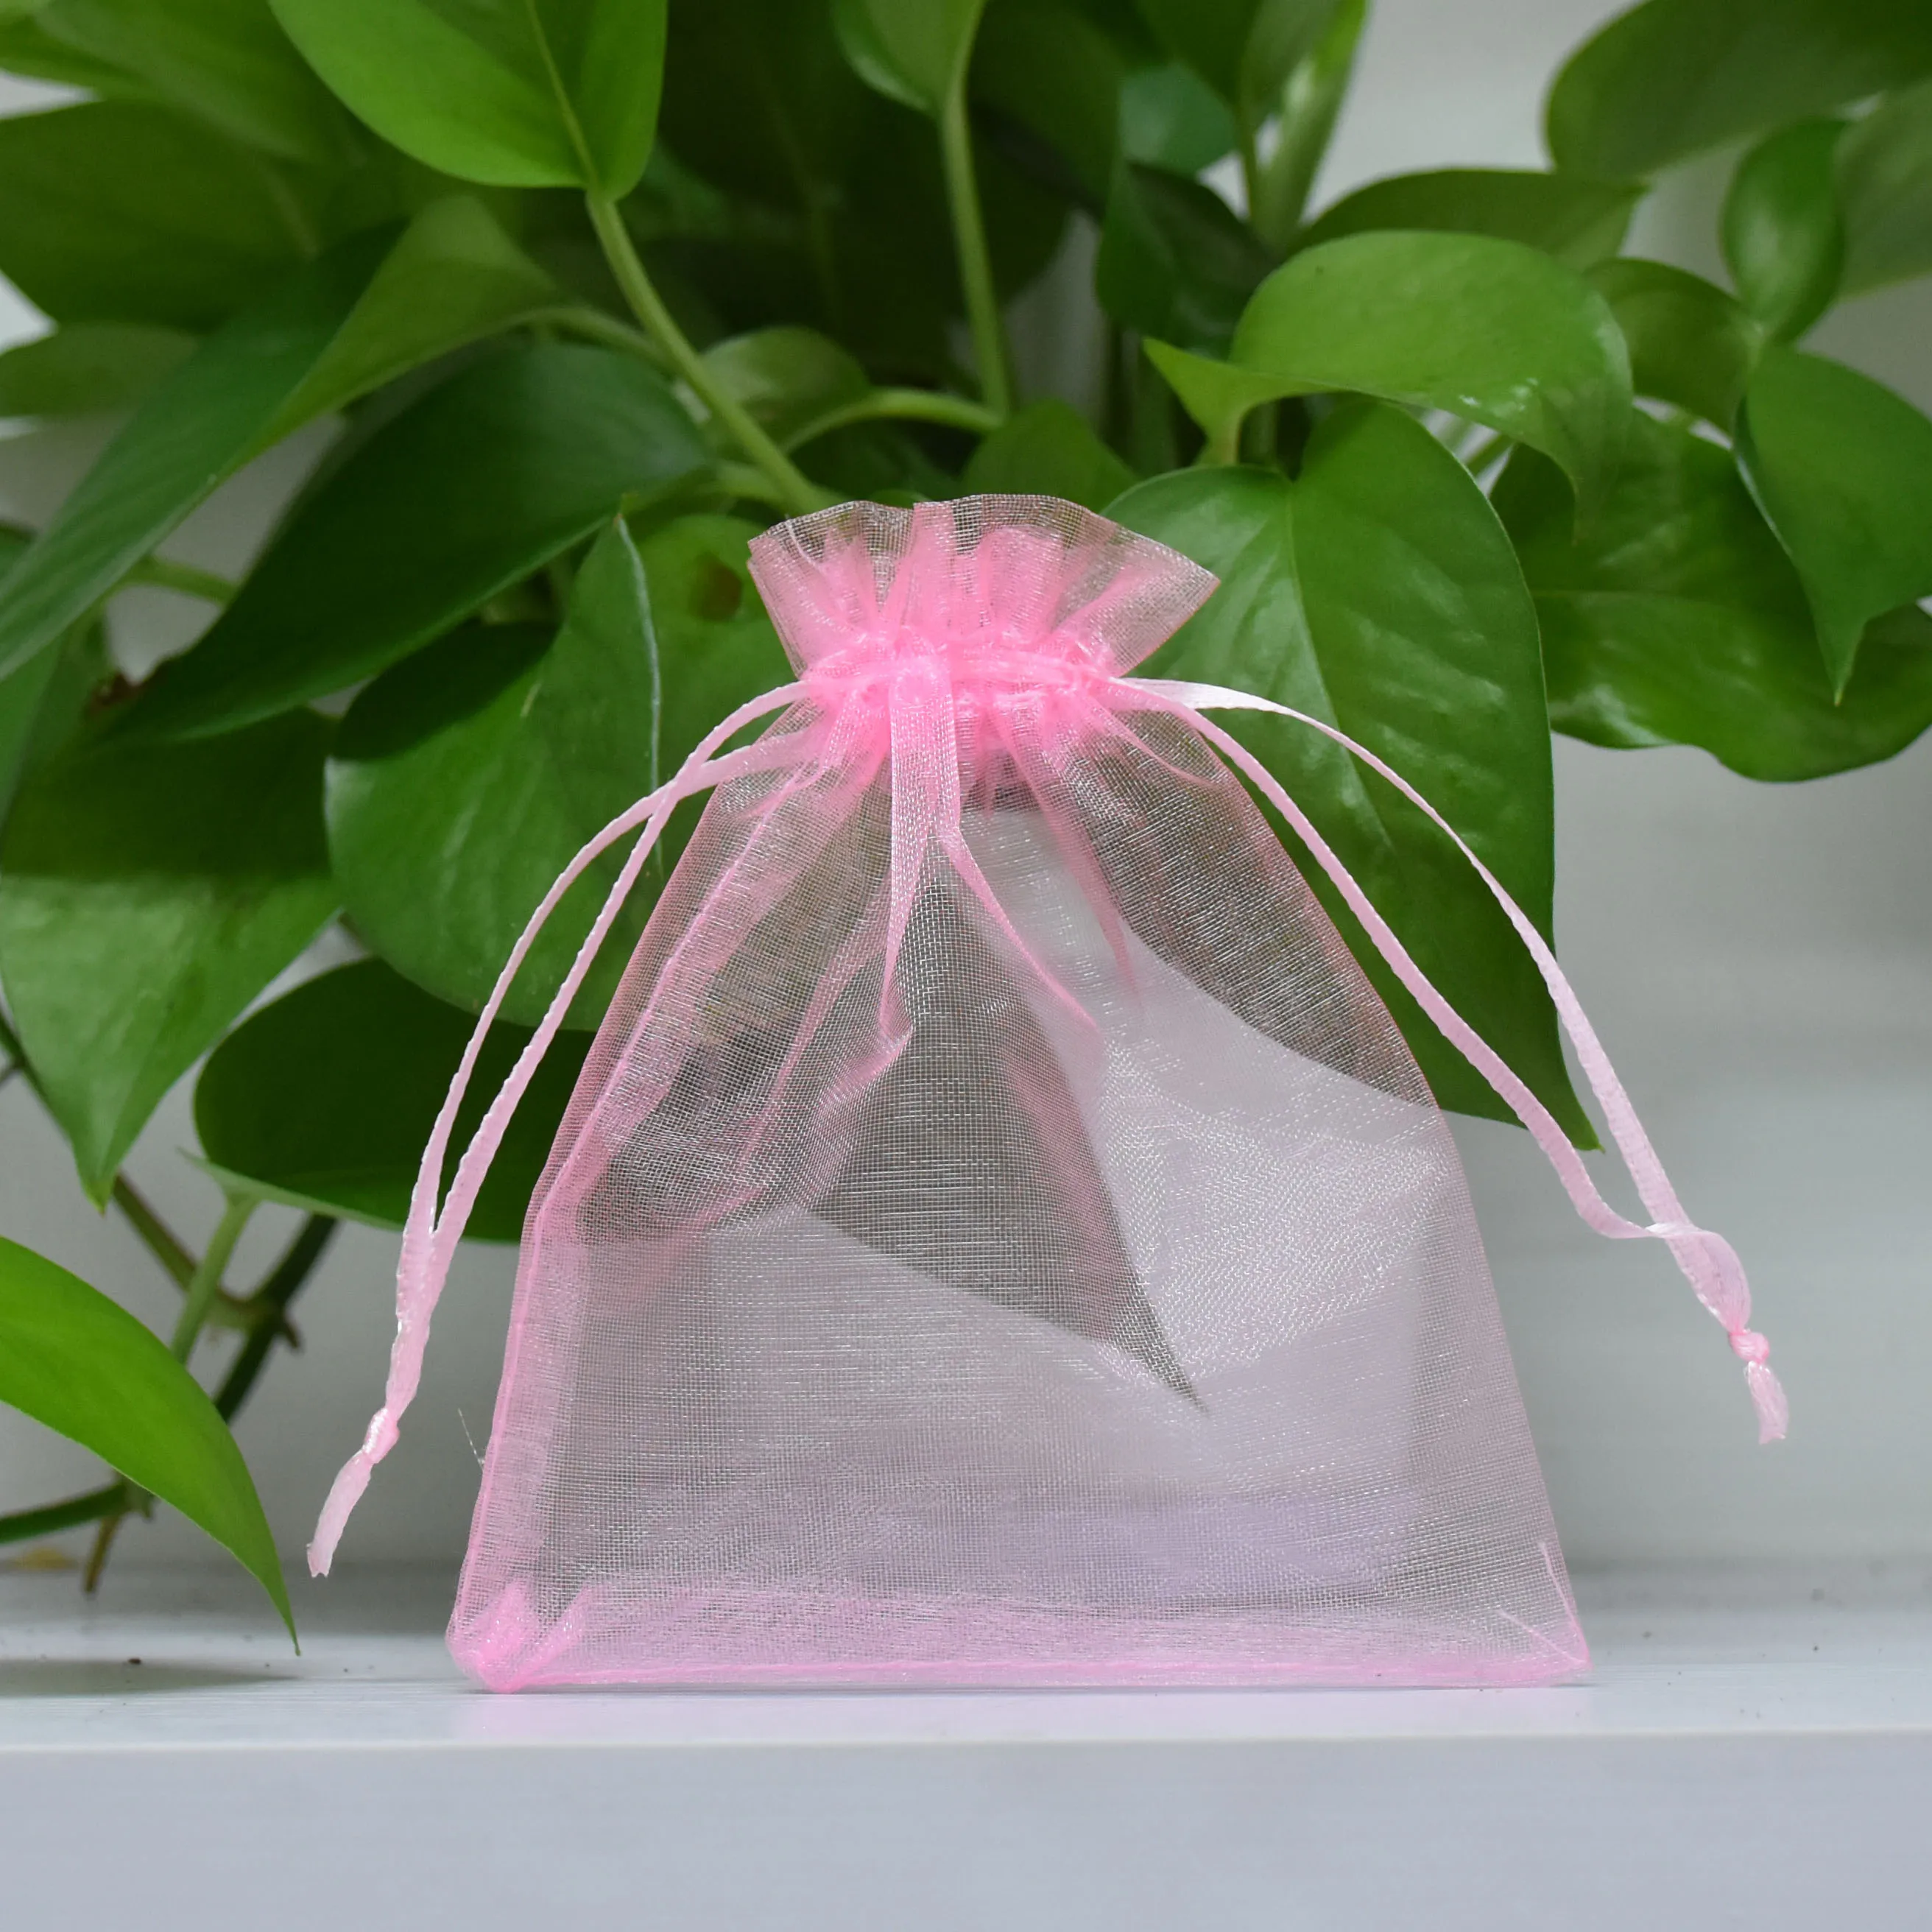 Details about   Pink Butterflies Jewelries Organza Bags Packaging Christmas Gifts Tulle Wrap New 